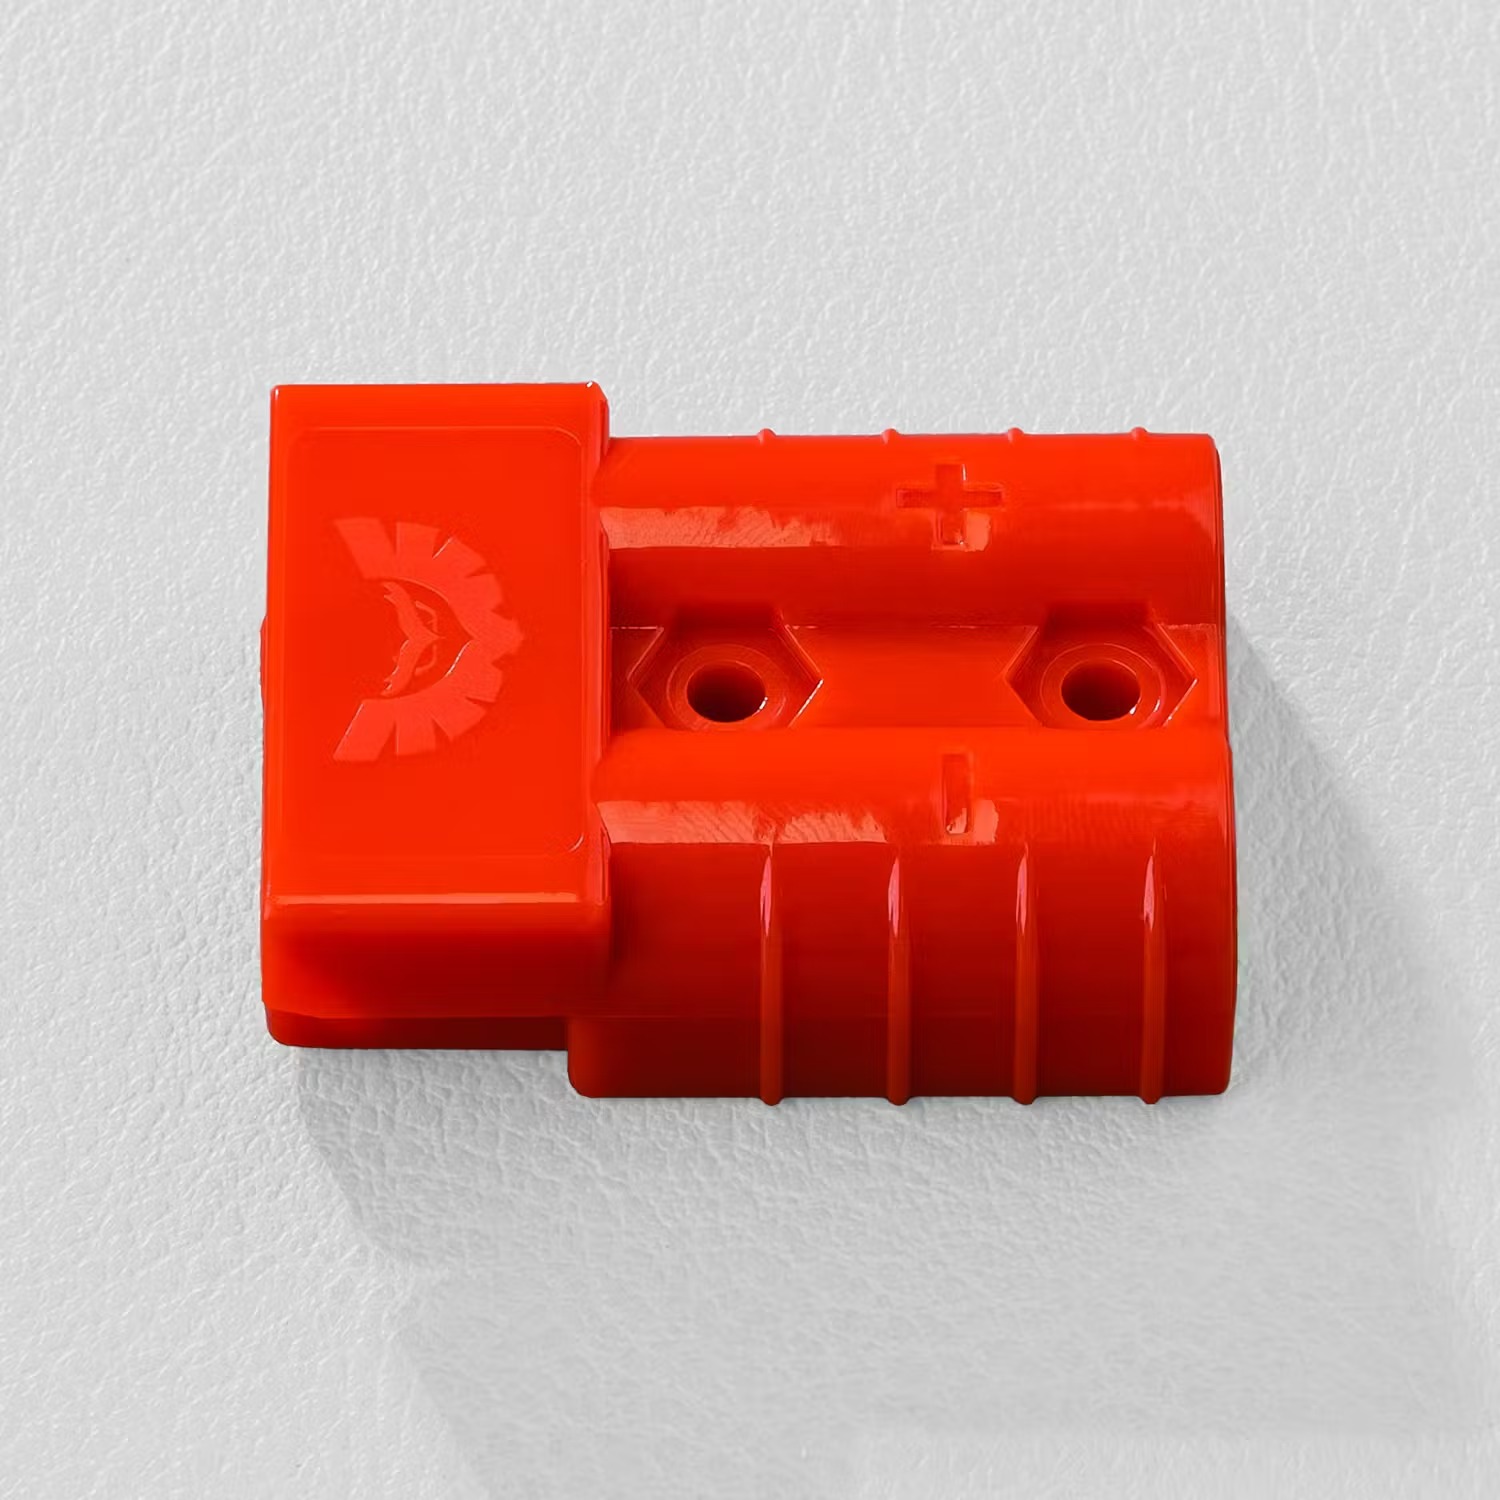 ANDERSON STYLE PLUG SINGLE PACK (RED)